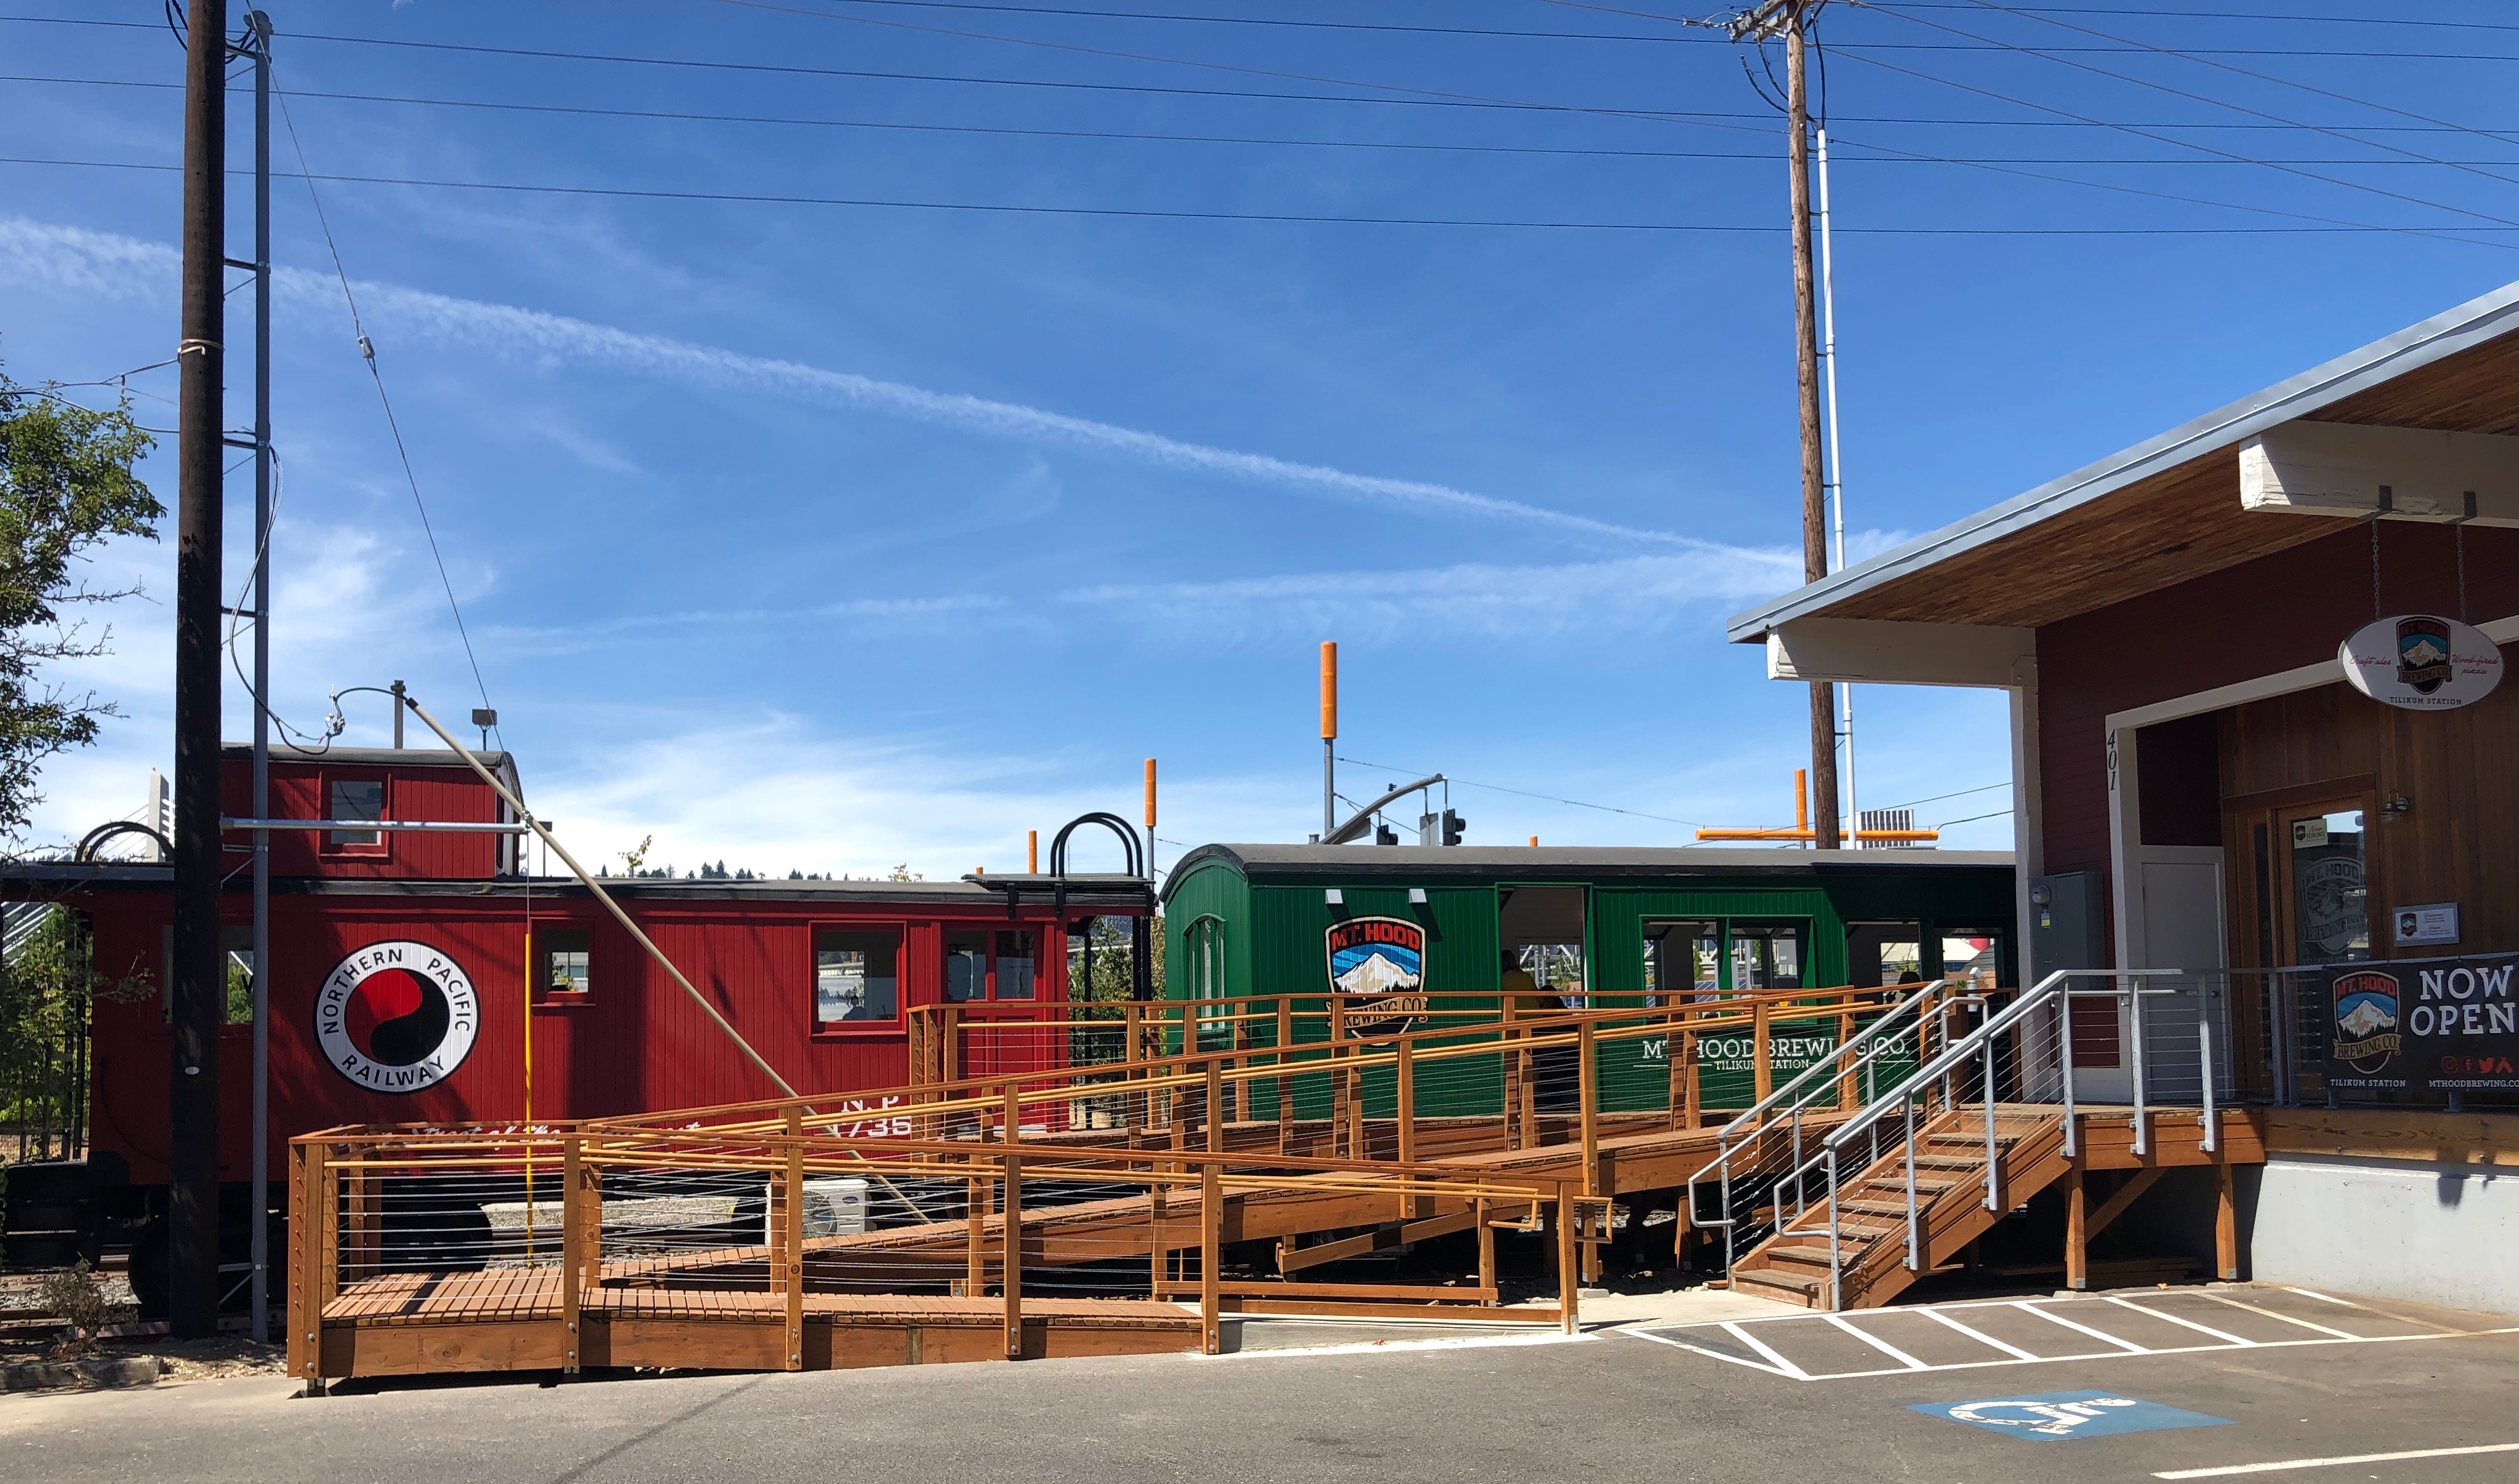 Two train cars offer seating options at Mt. Hood Brewing Tilikum Station.